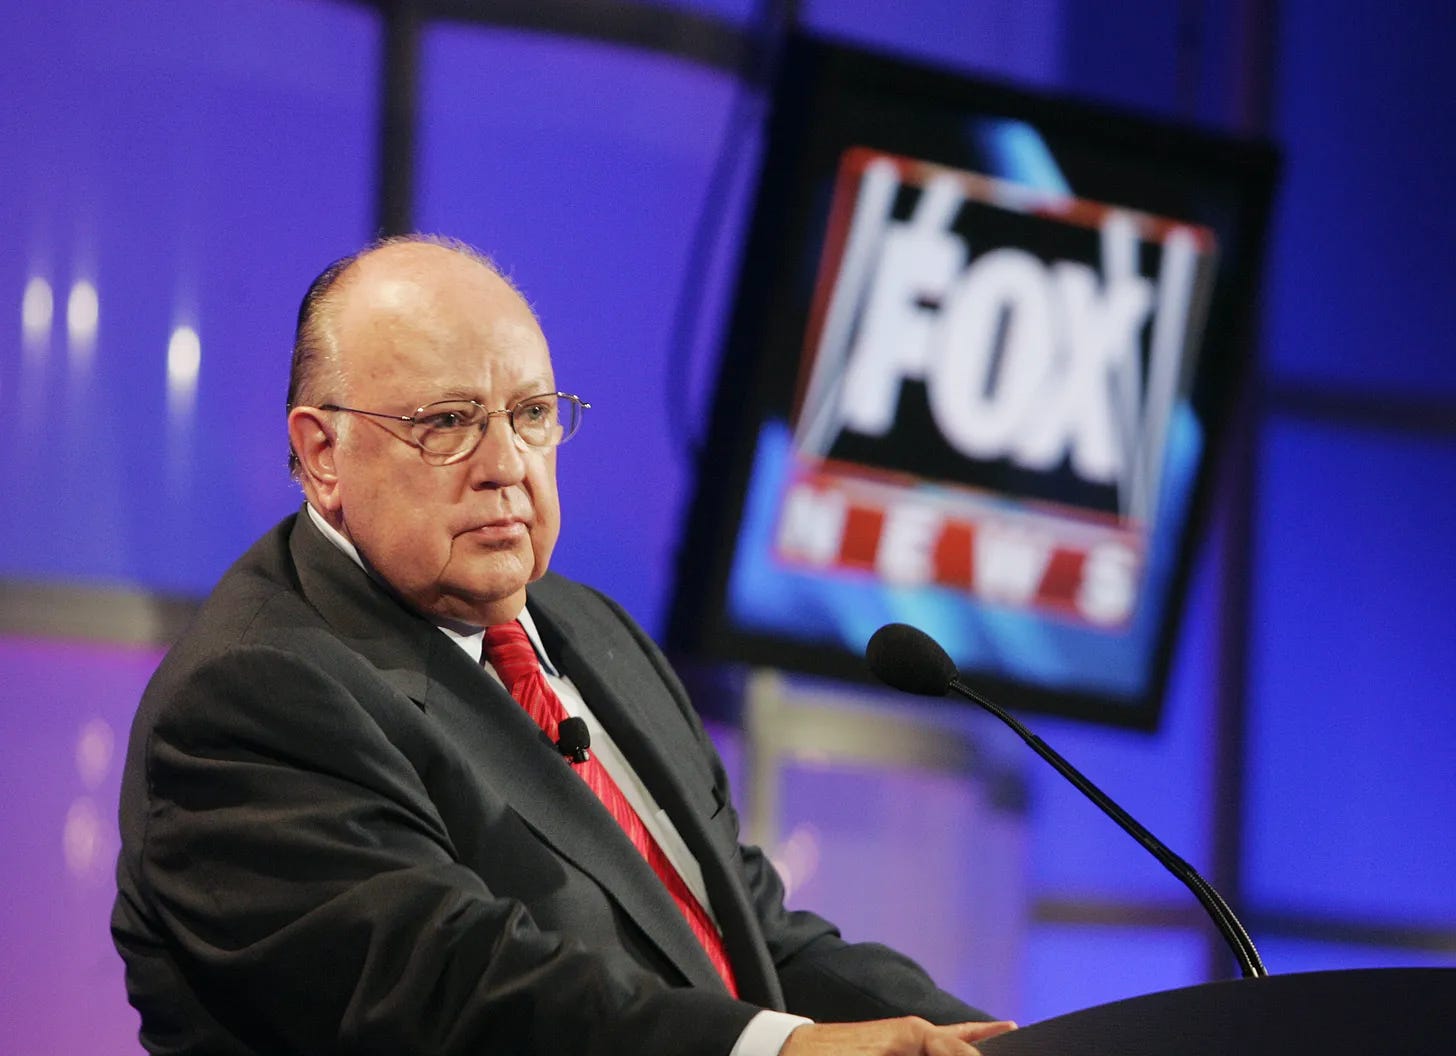 Photo of Roger Ailes with Fox News logo